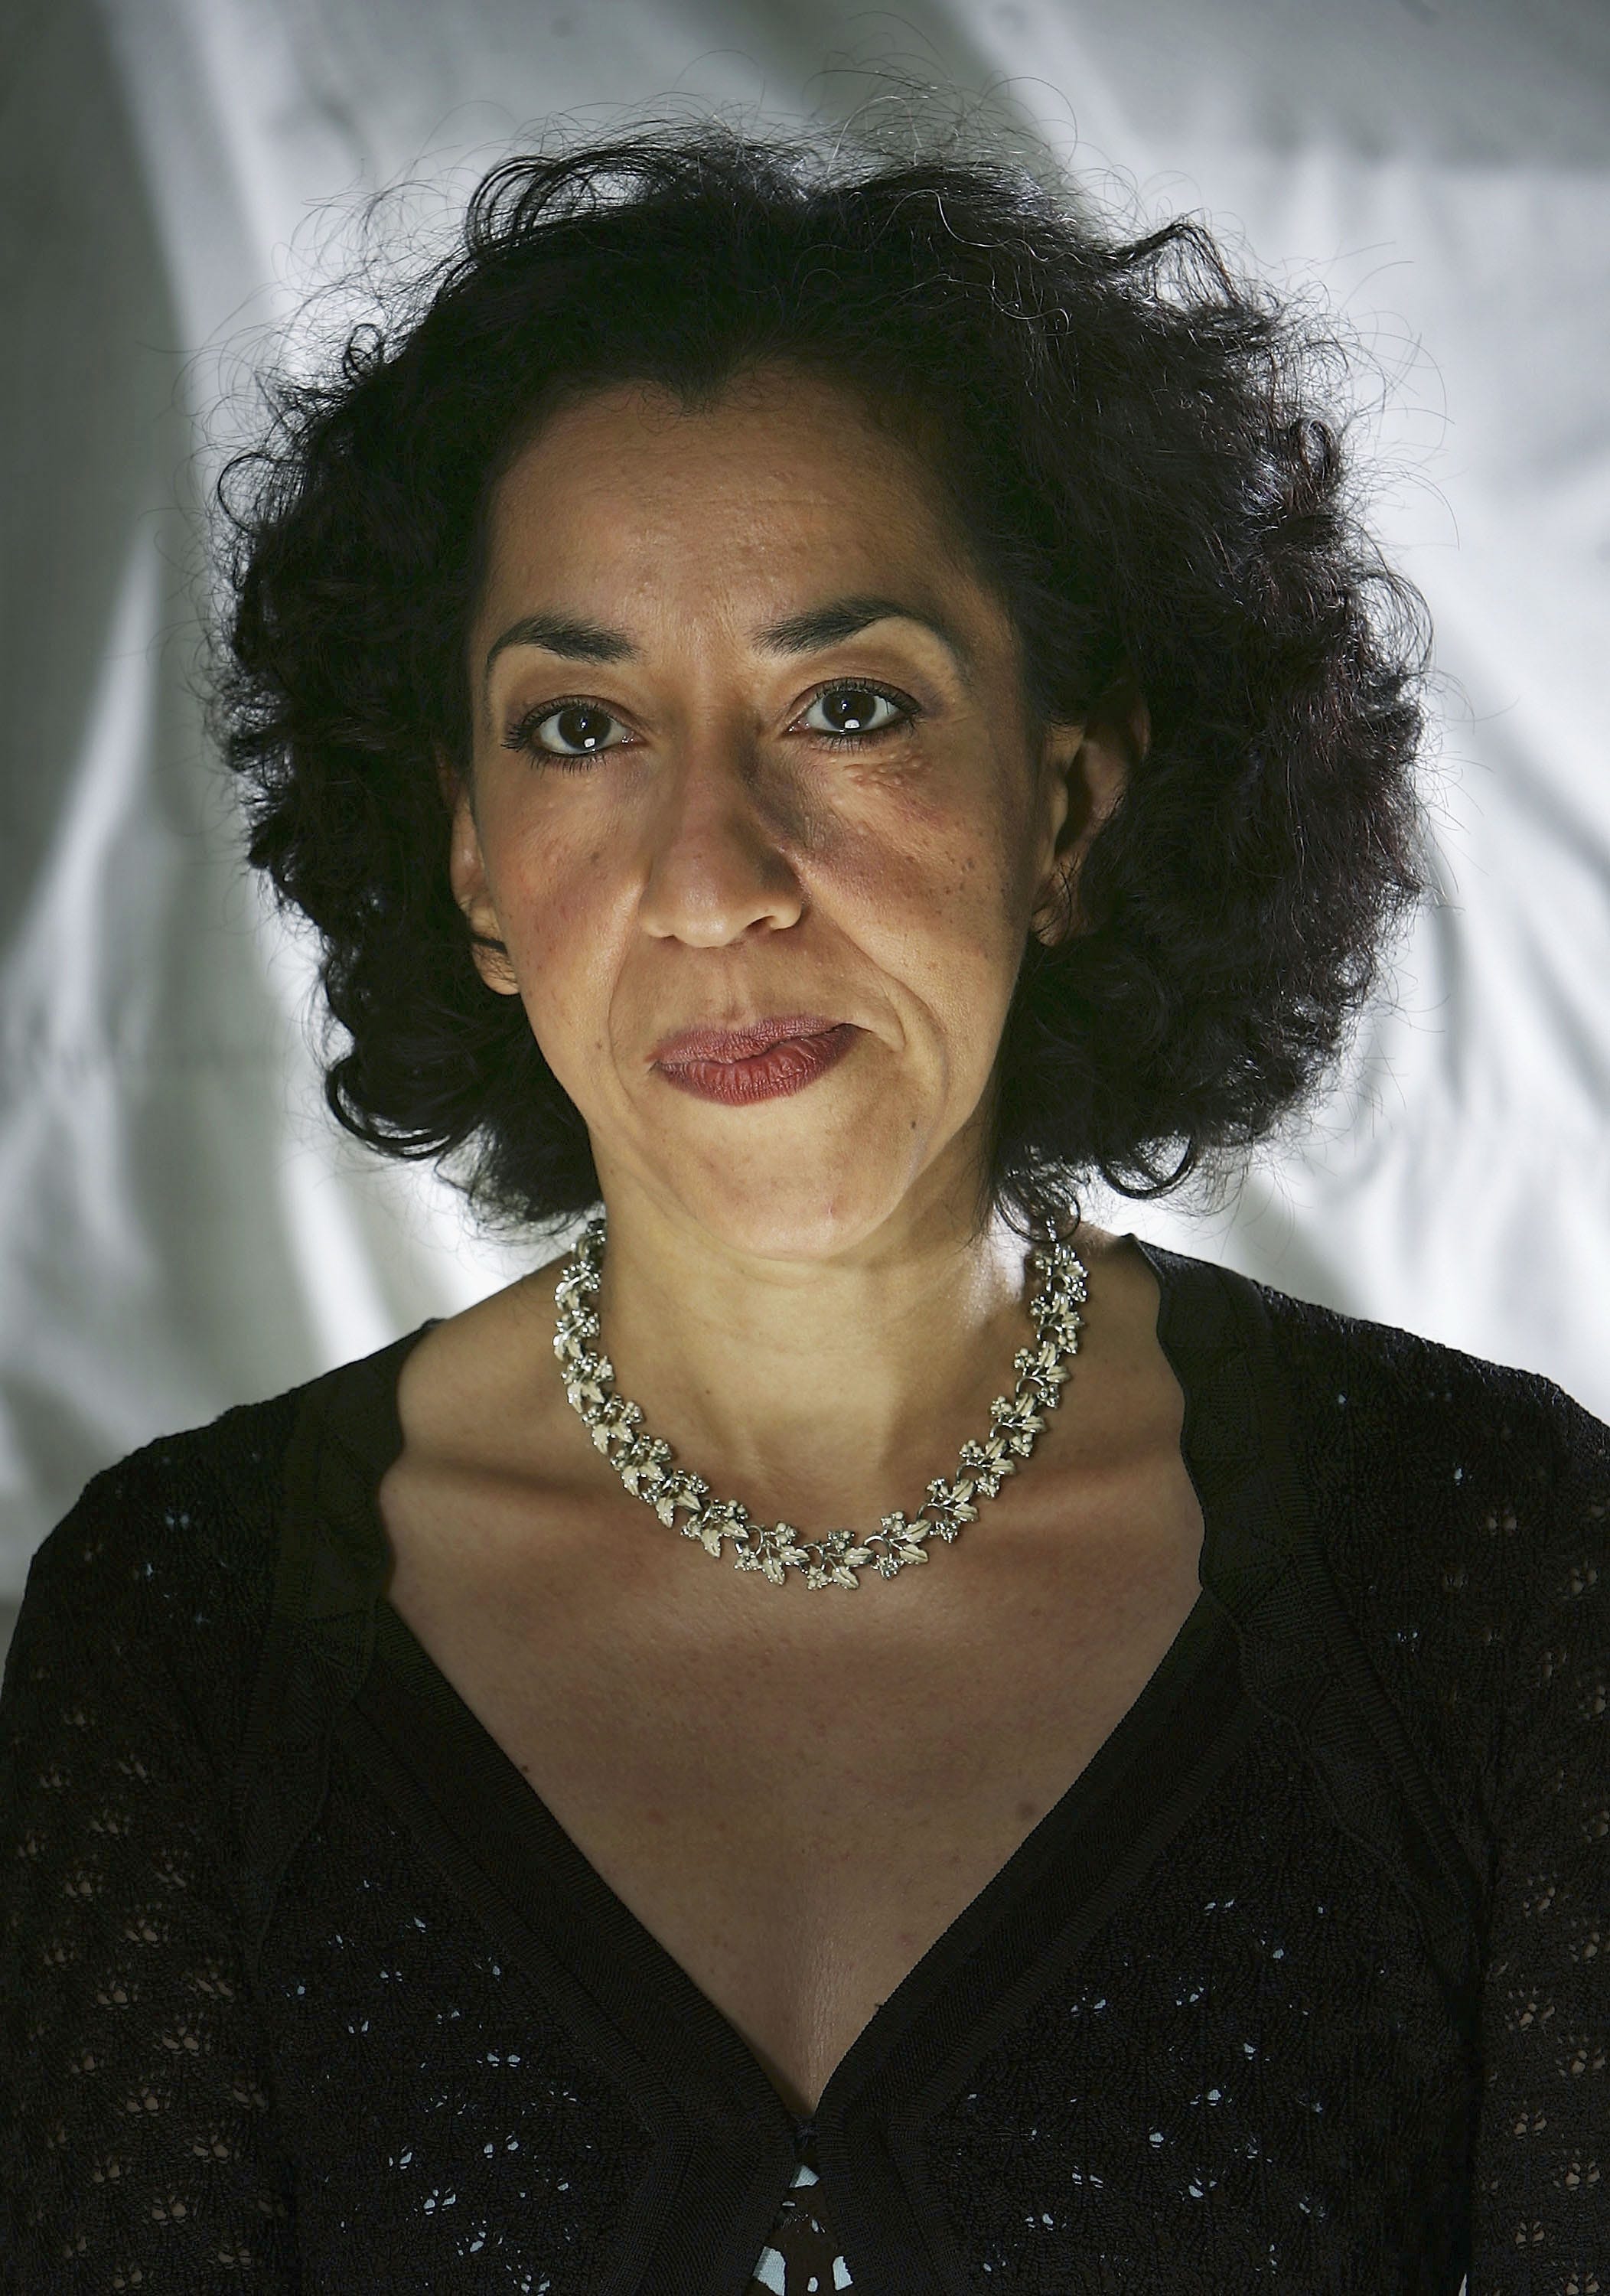 Andrea Levy, bestselling British author, dead at 62 from cancer